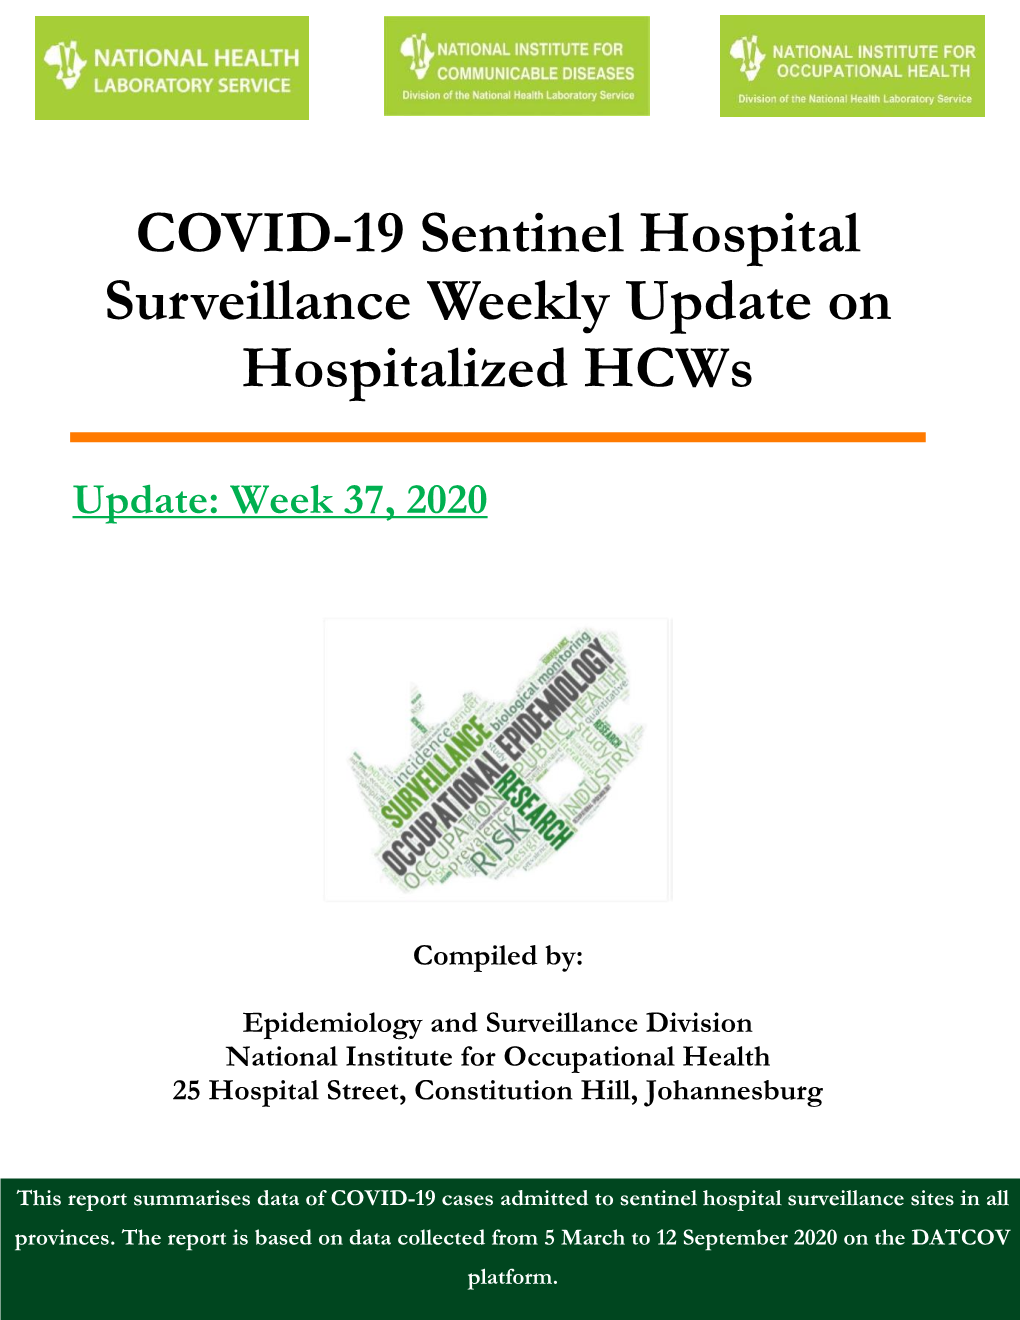 Covid-19 Sentinel Hospital Surveillance for Hcws Report